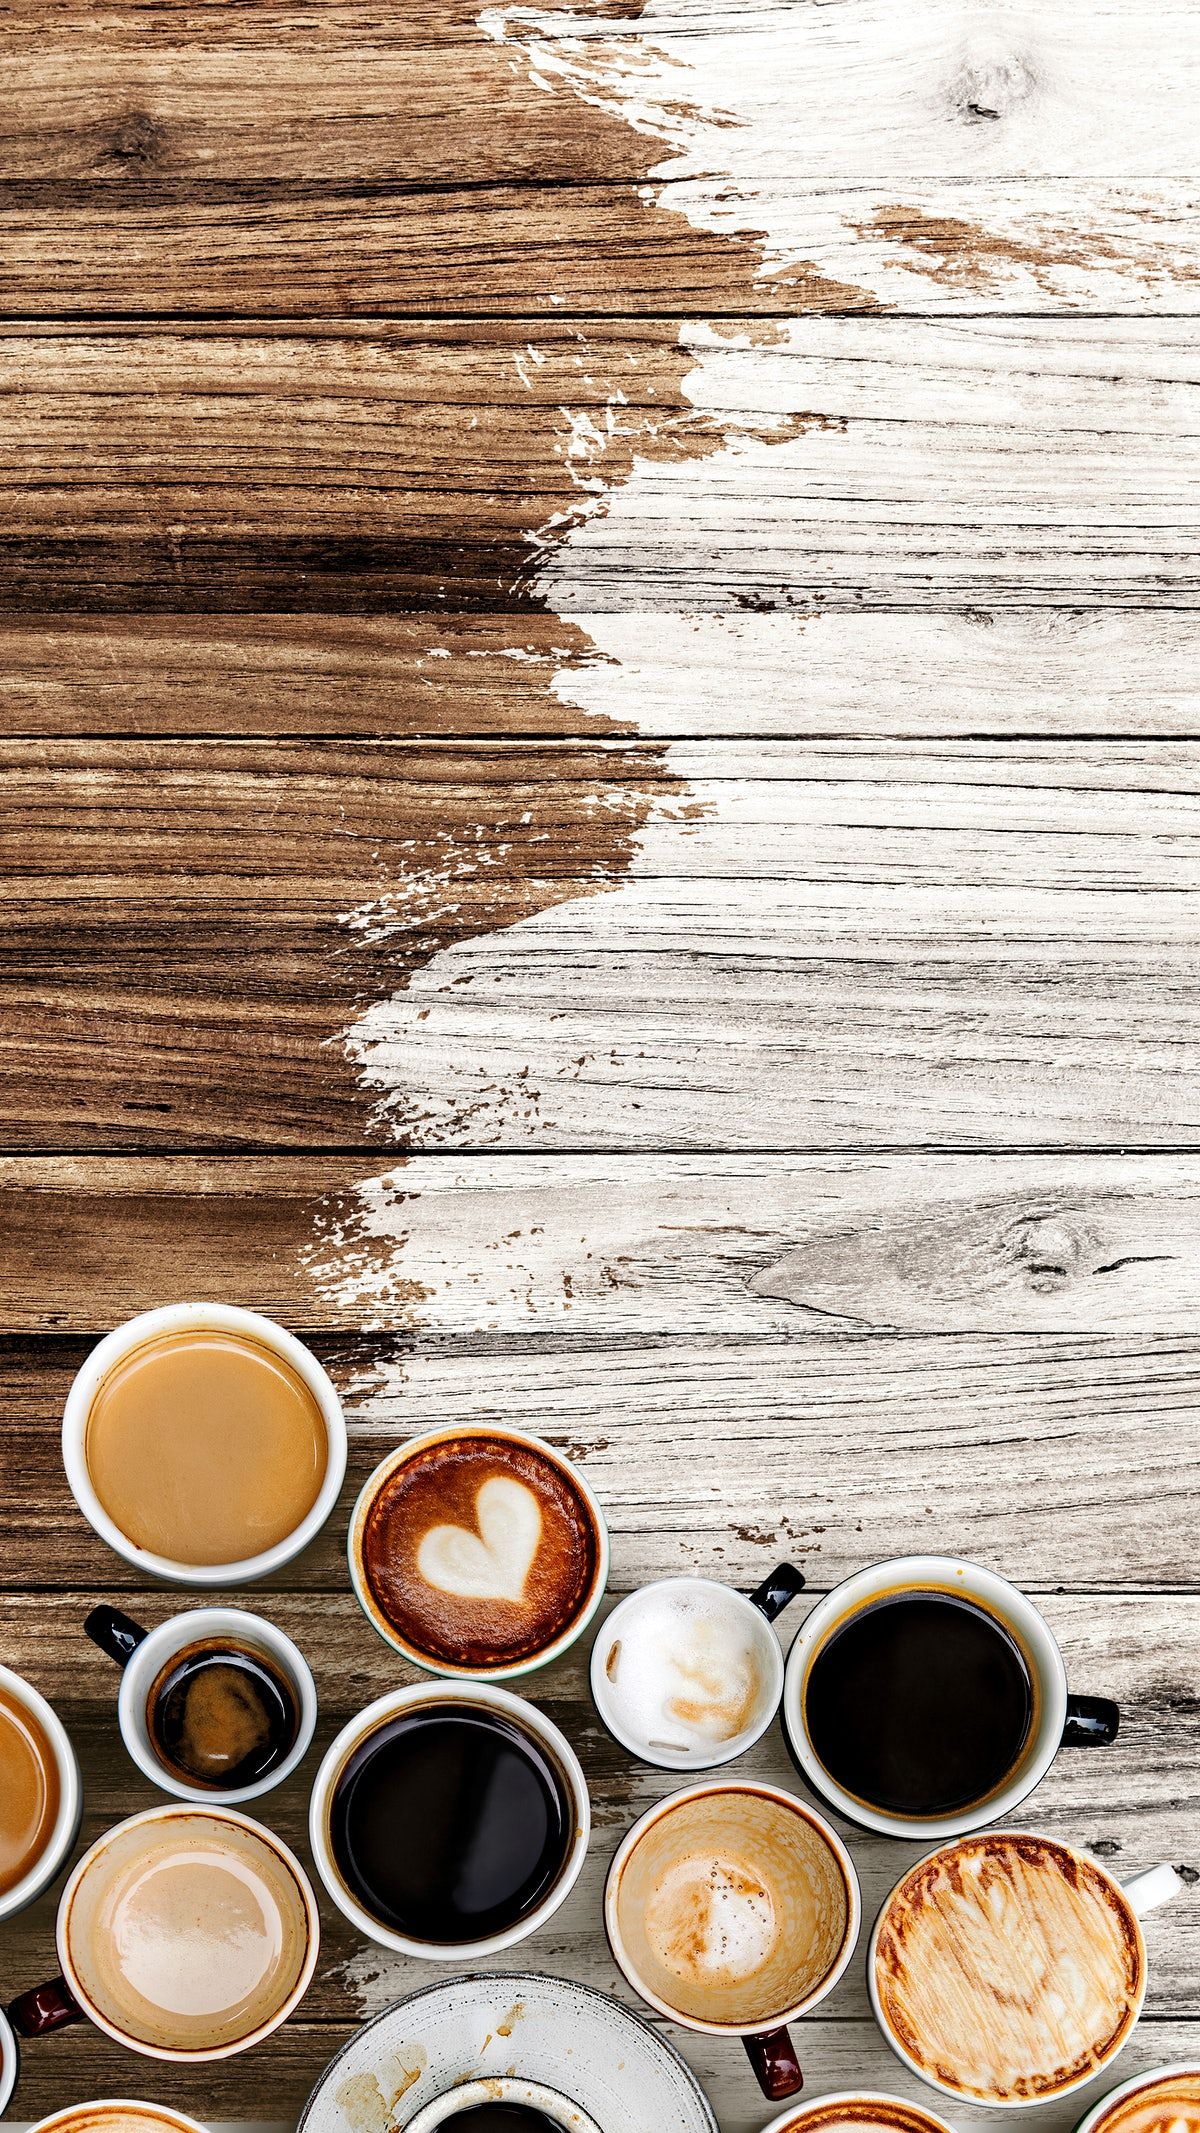 Coffee mugs on a pale white and brown wooden textured background. free image. Coffee wallpaper iphone, Coffee wallpaper, Coffee image